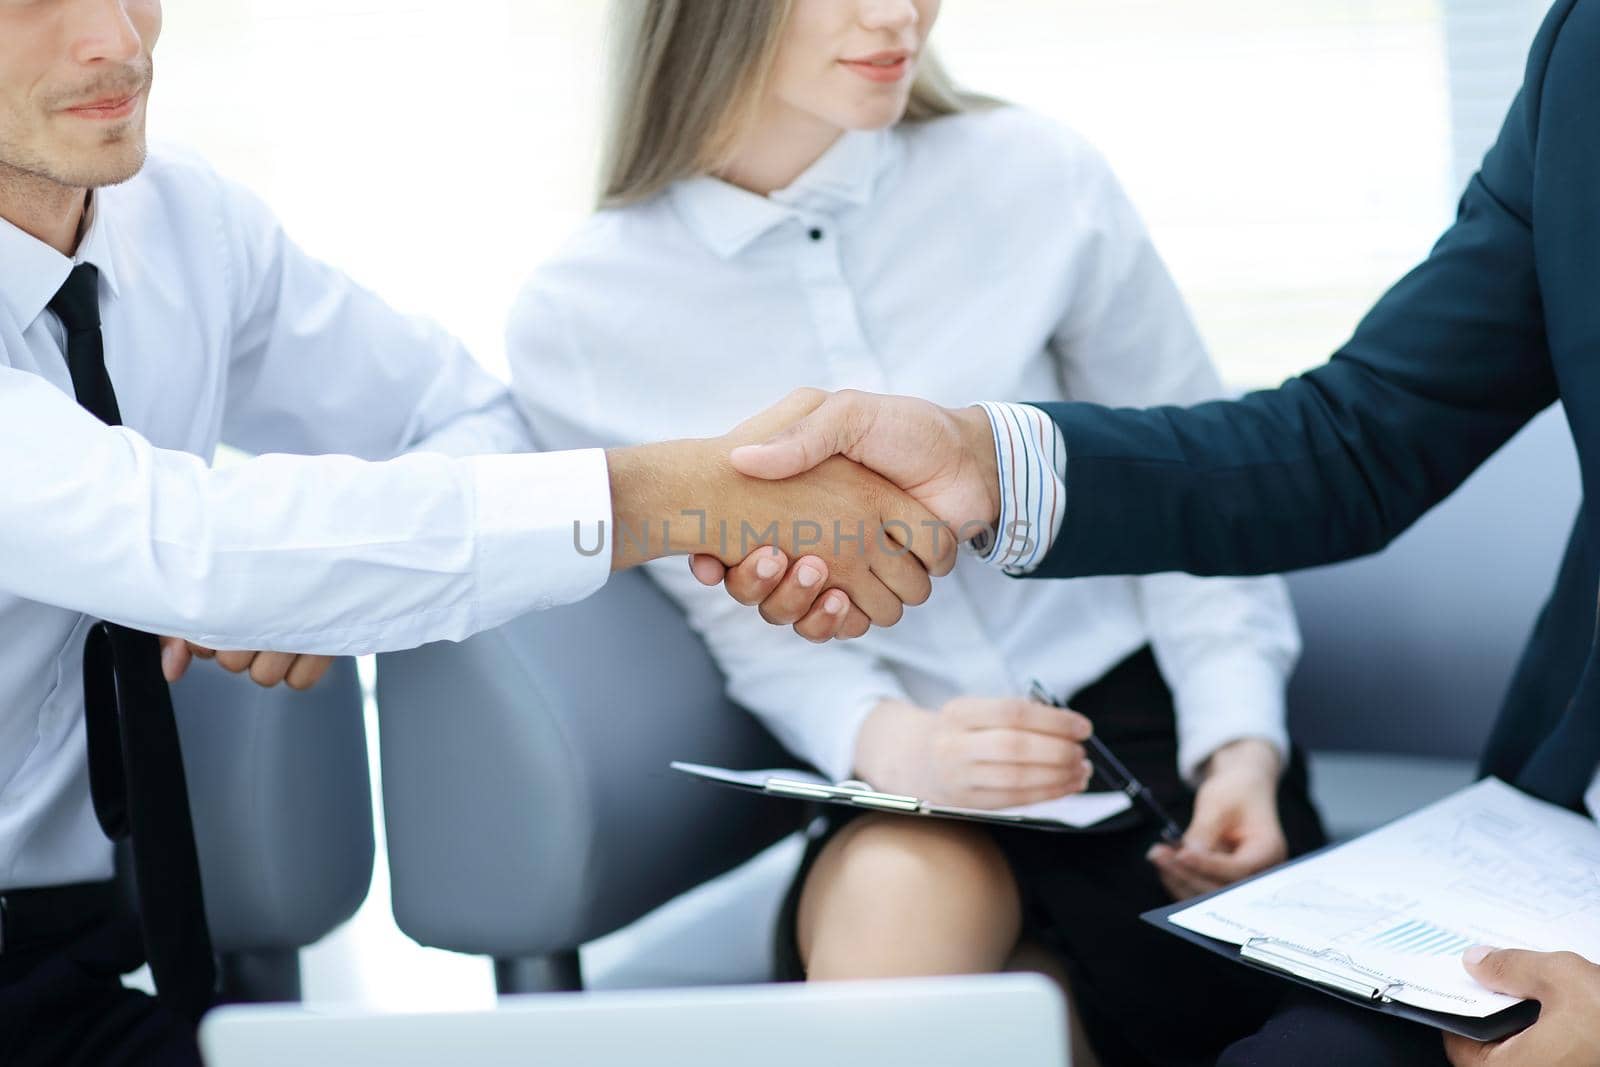 business partners greeting each other with a handshake.photo with copy space